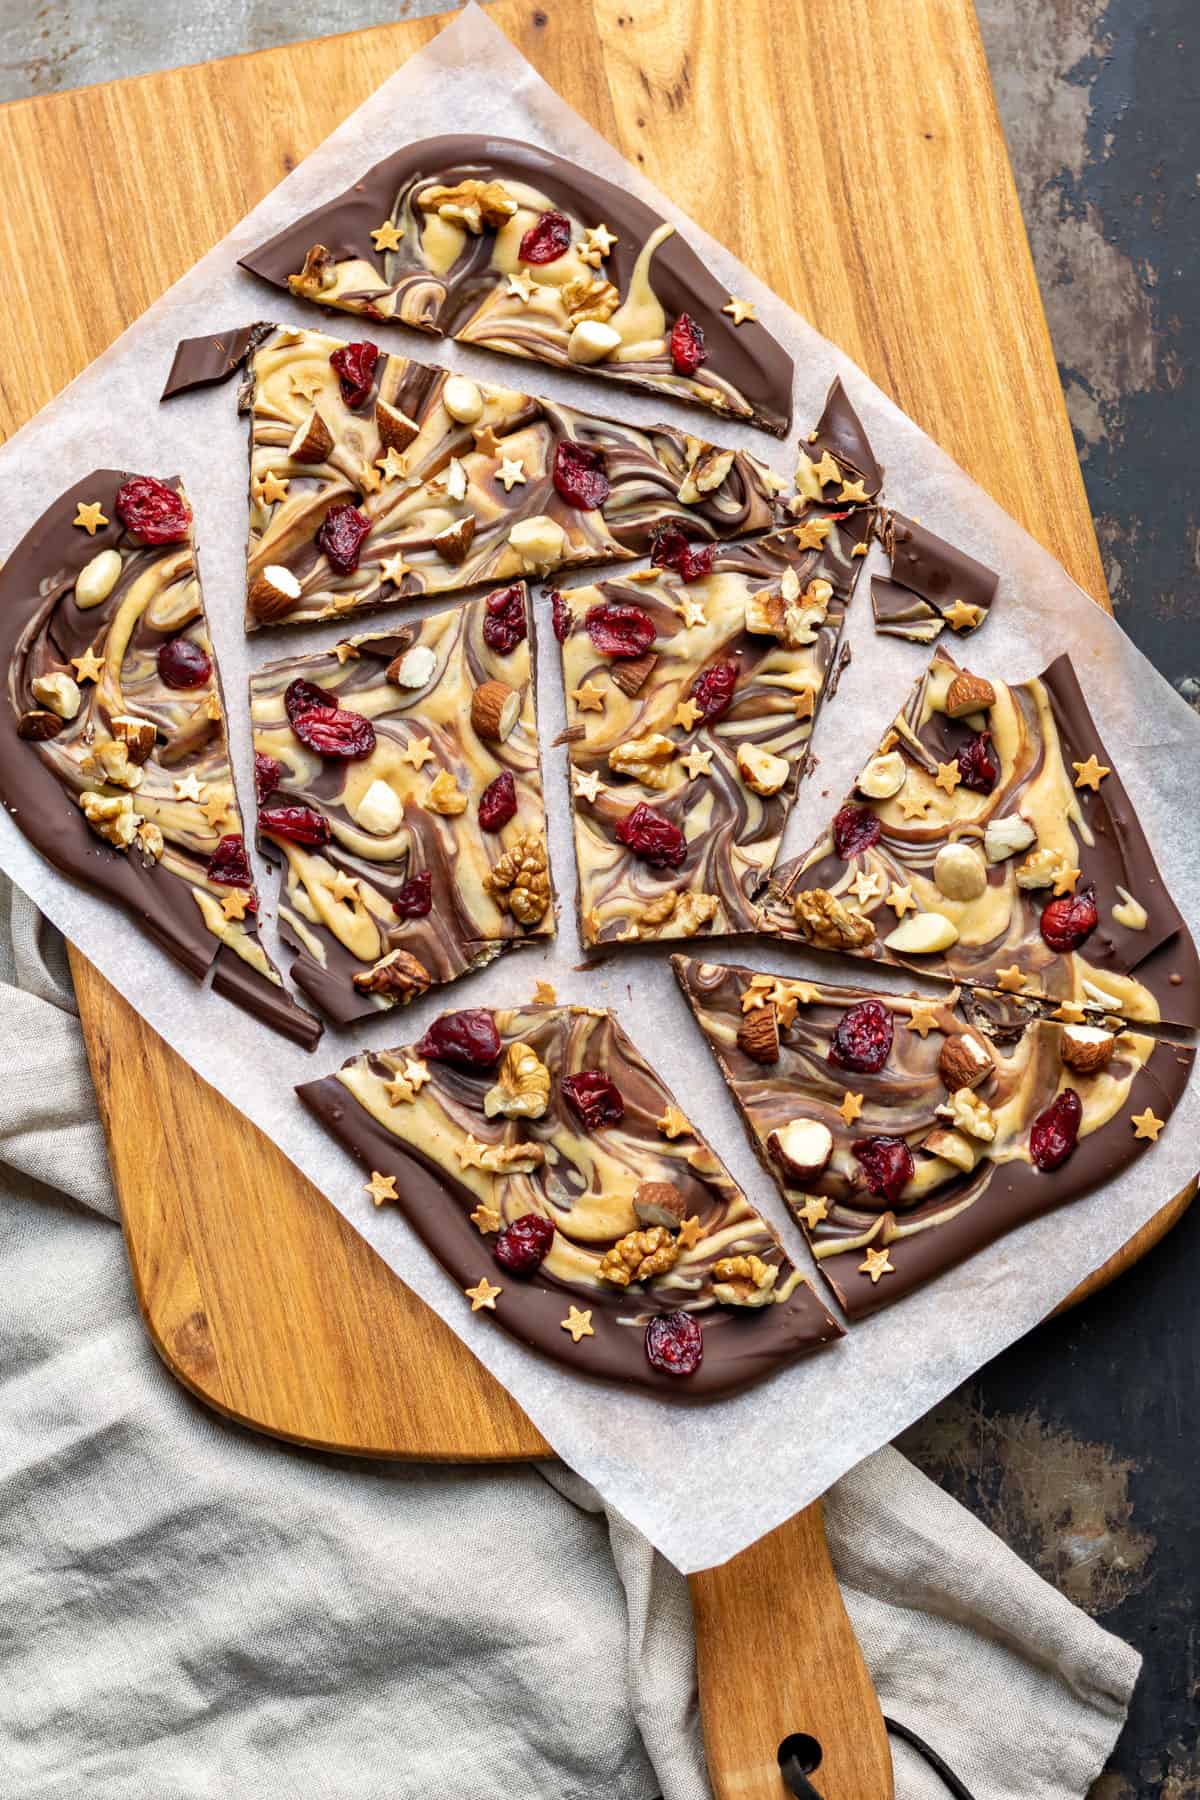 Cut shards of melted and re-hardened chocolate with dried cranberries, chopped nuts and star shaped sprinkles.